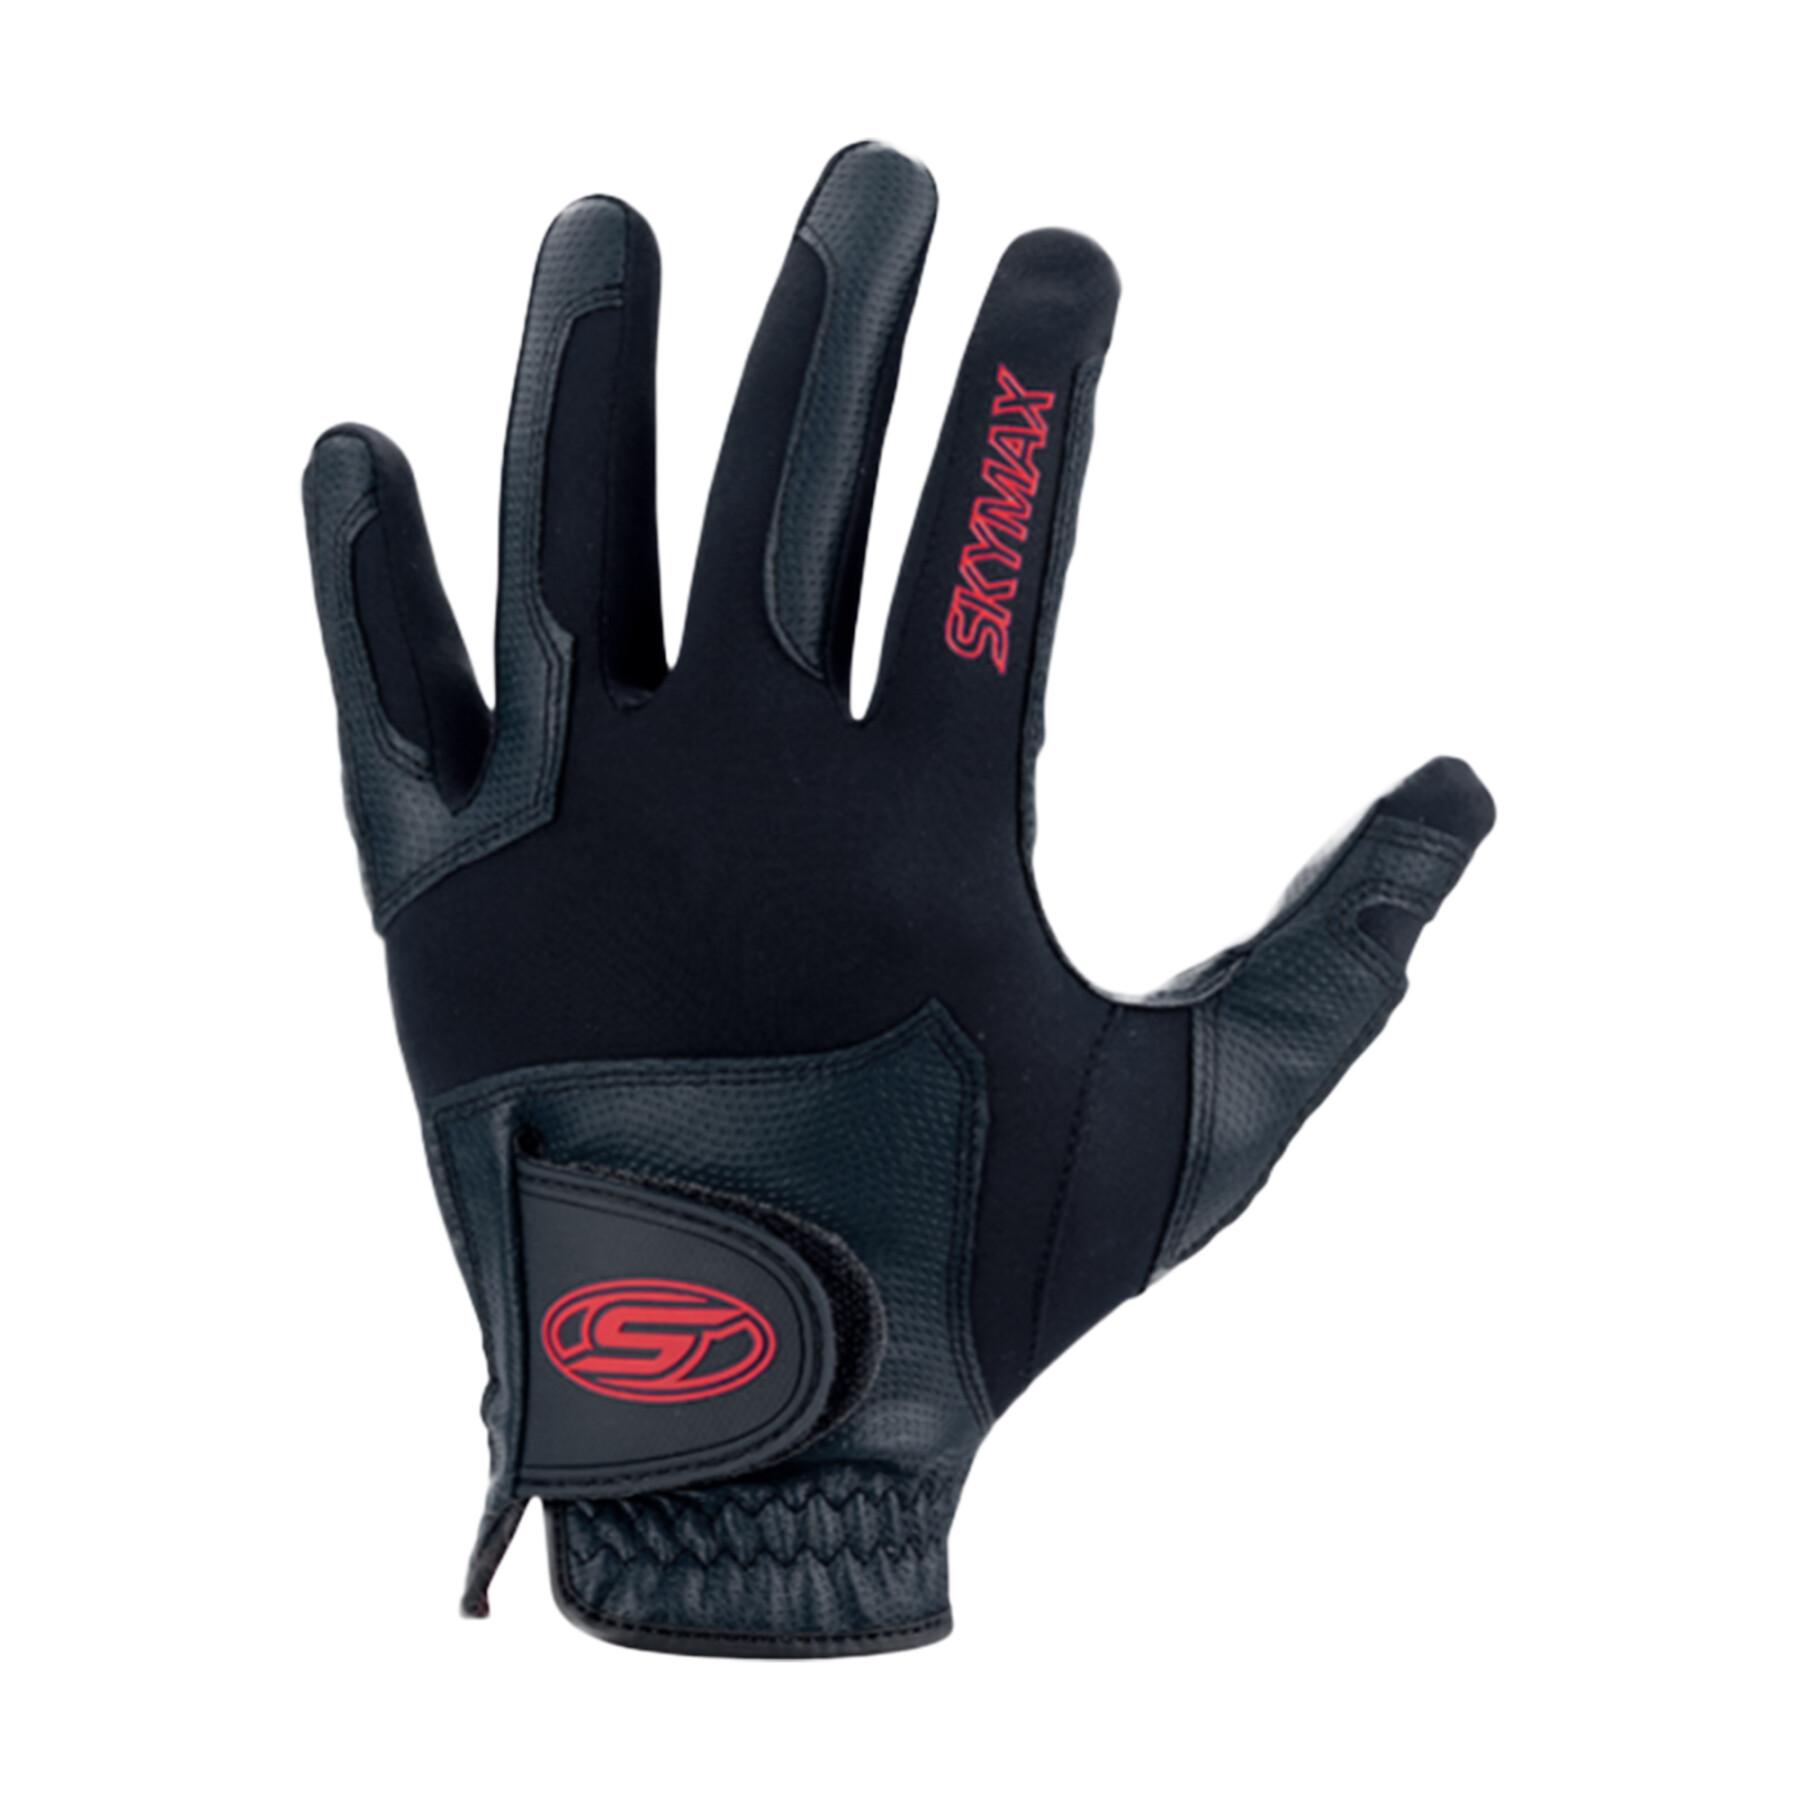 Guantes de golf para mujer Skymax All Weather Glove Lady